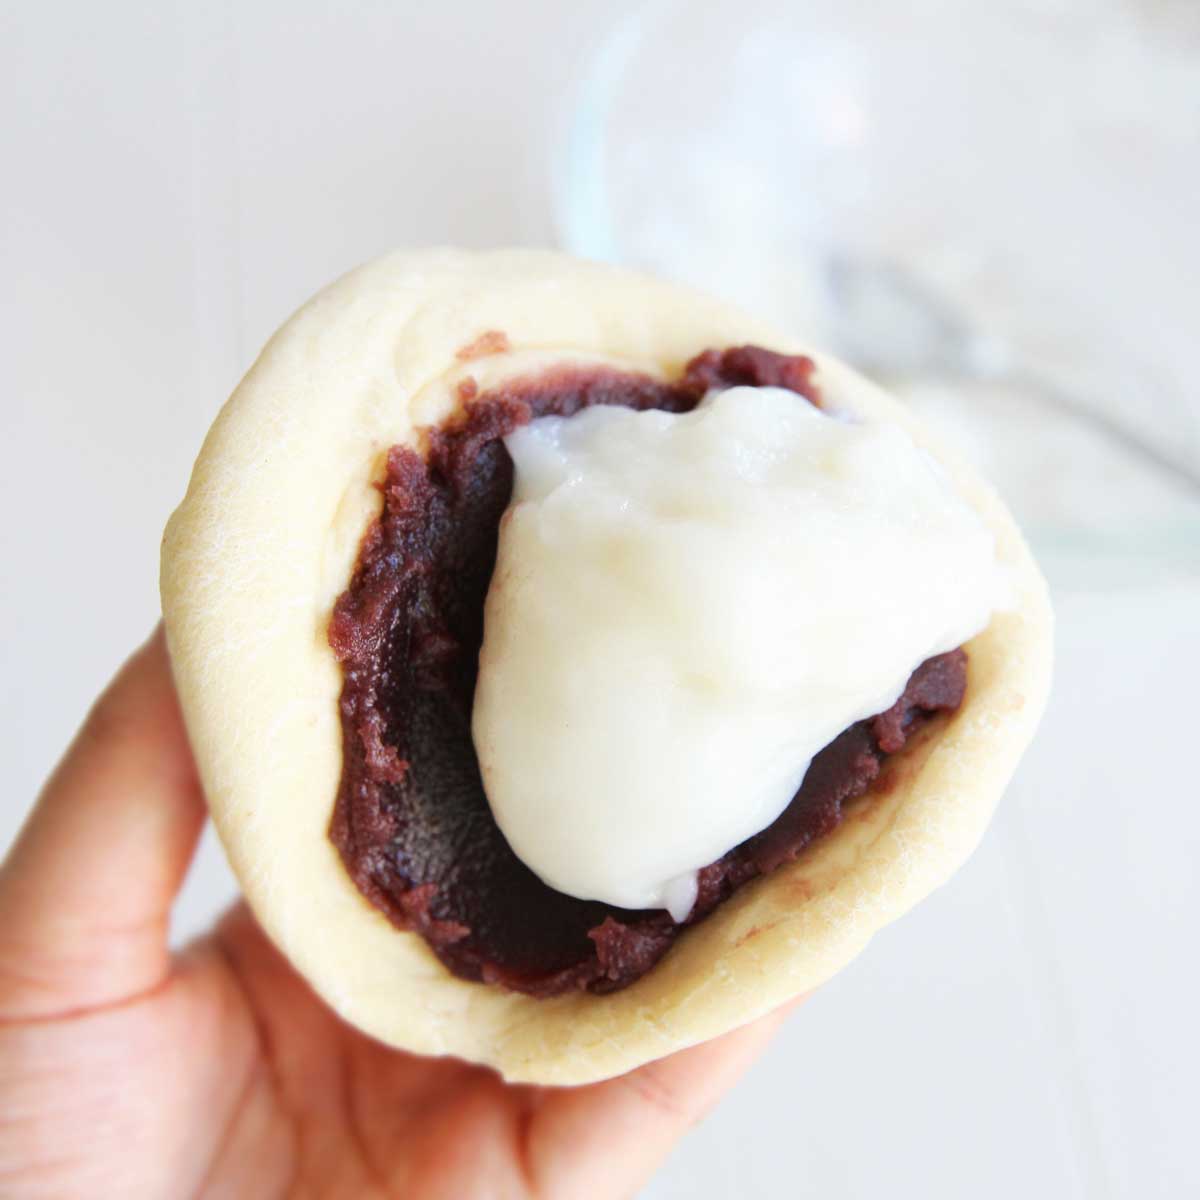 Tofu Steamed Buns with Mochi Filling (Yeasted, Japanese Style Recipe) - Steamed Buns with Mochi